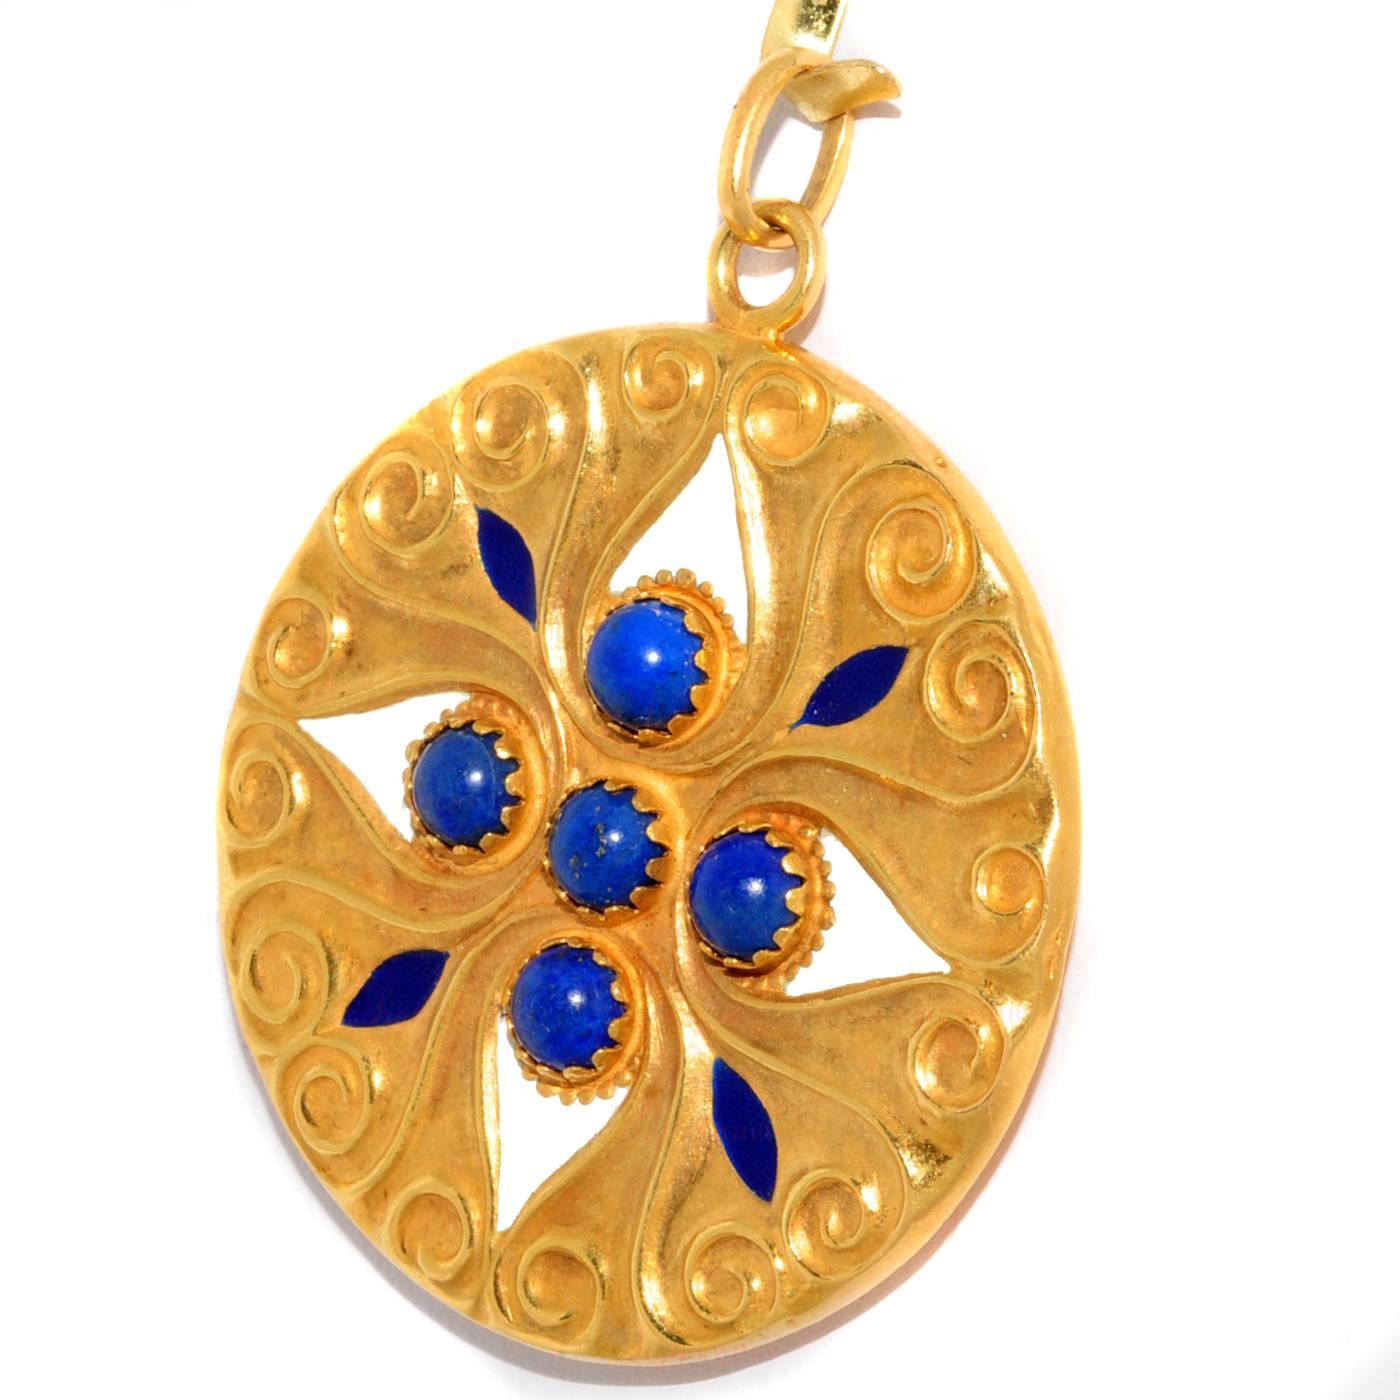 This round filigree pendant was made in 1960s and features 4 natural lapis lazuli stones and enamel accents set in 18k yellow gold. Measurements: 1.61